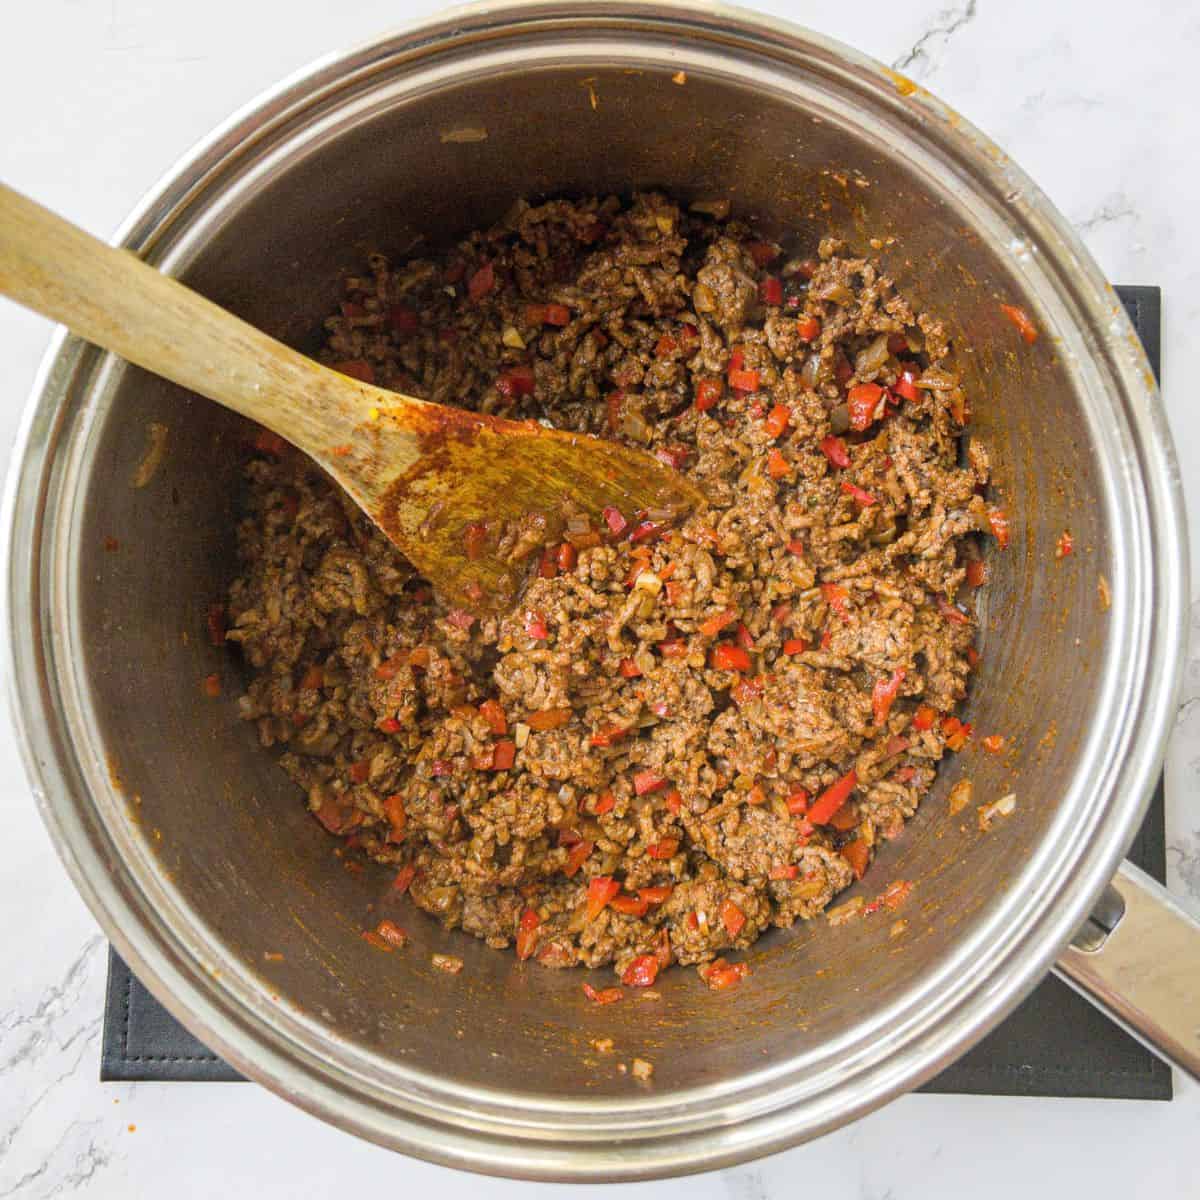 Minced beef and chilli being cooked in a saucepan. A wooden spoon is in the saucepan.